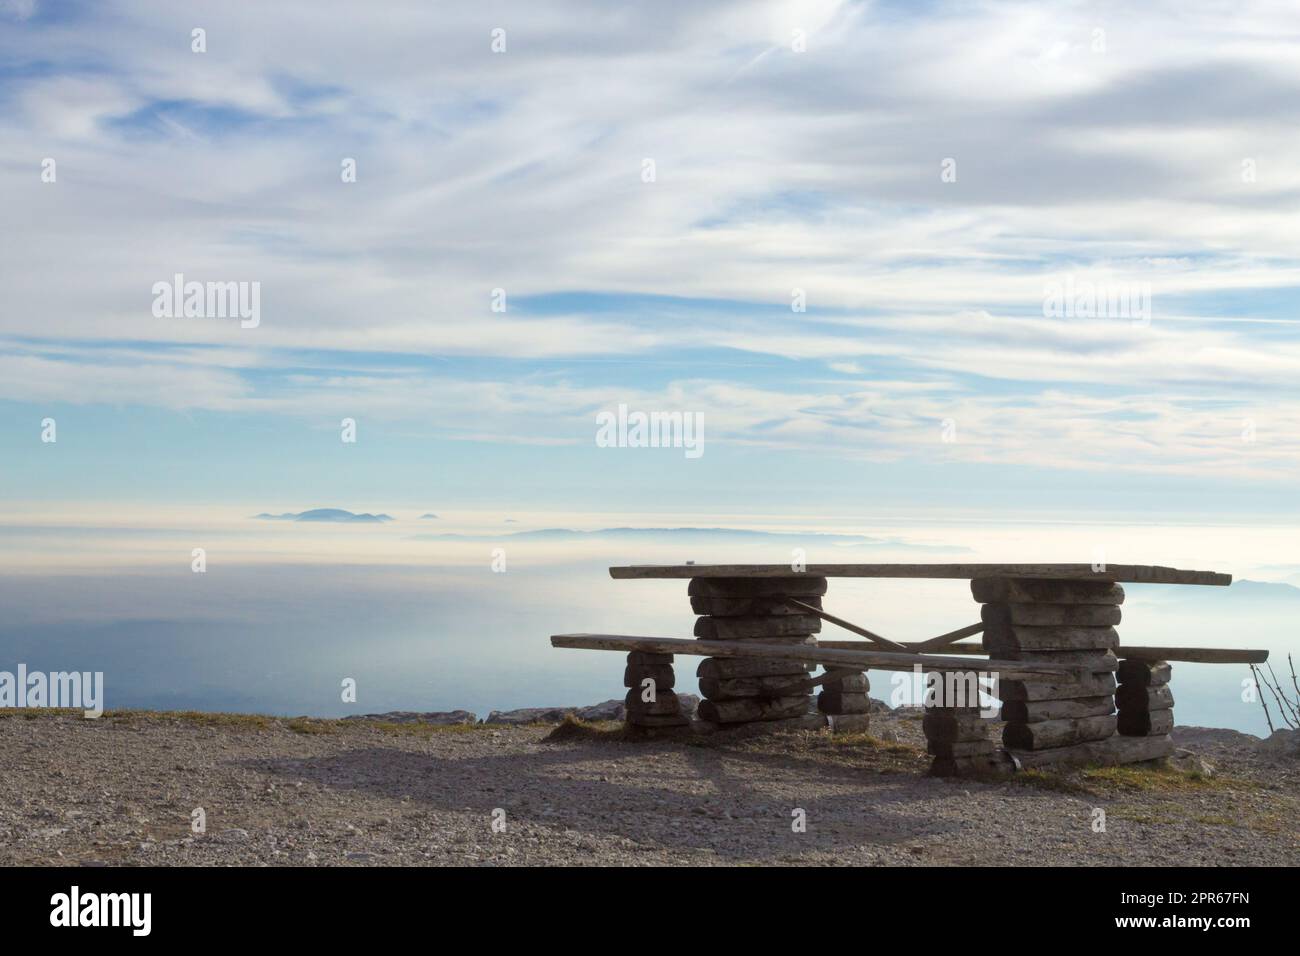 Horizon landscape with clouds and bench in foreground Stock Photo